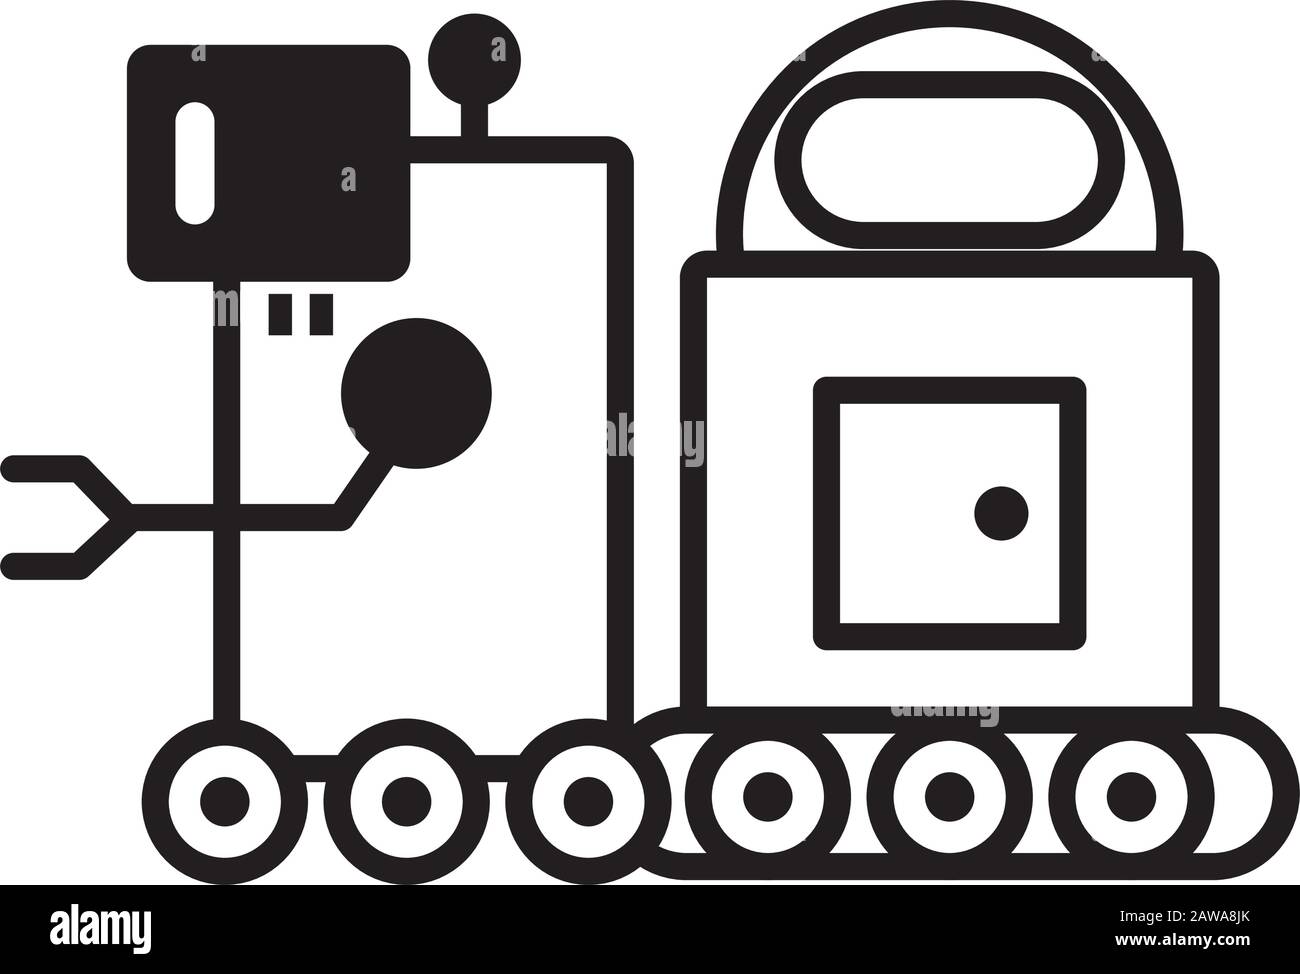 couple of robots technology icons Stock Vector